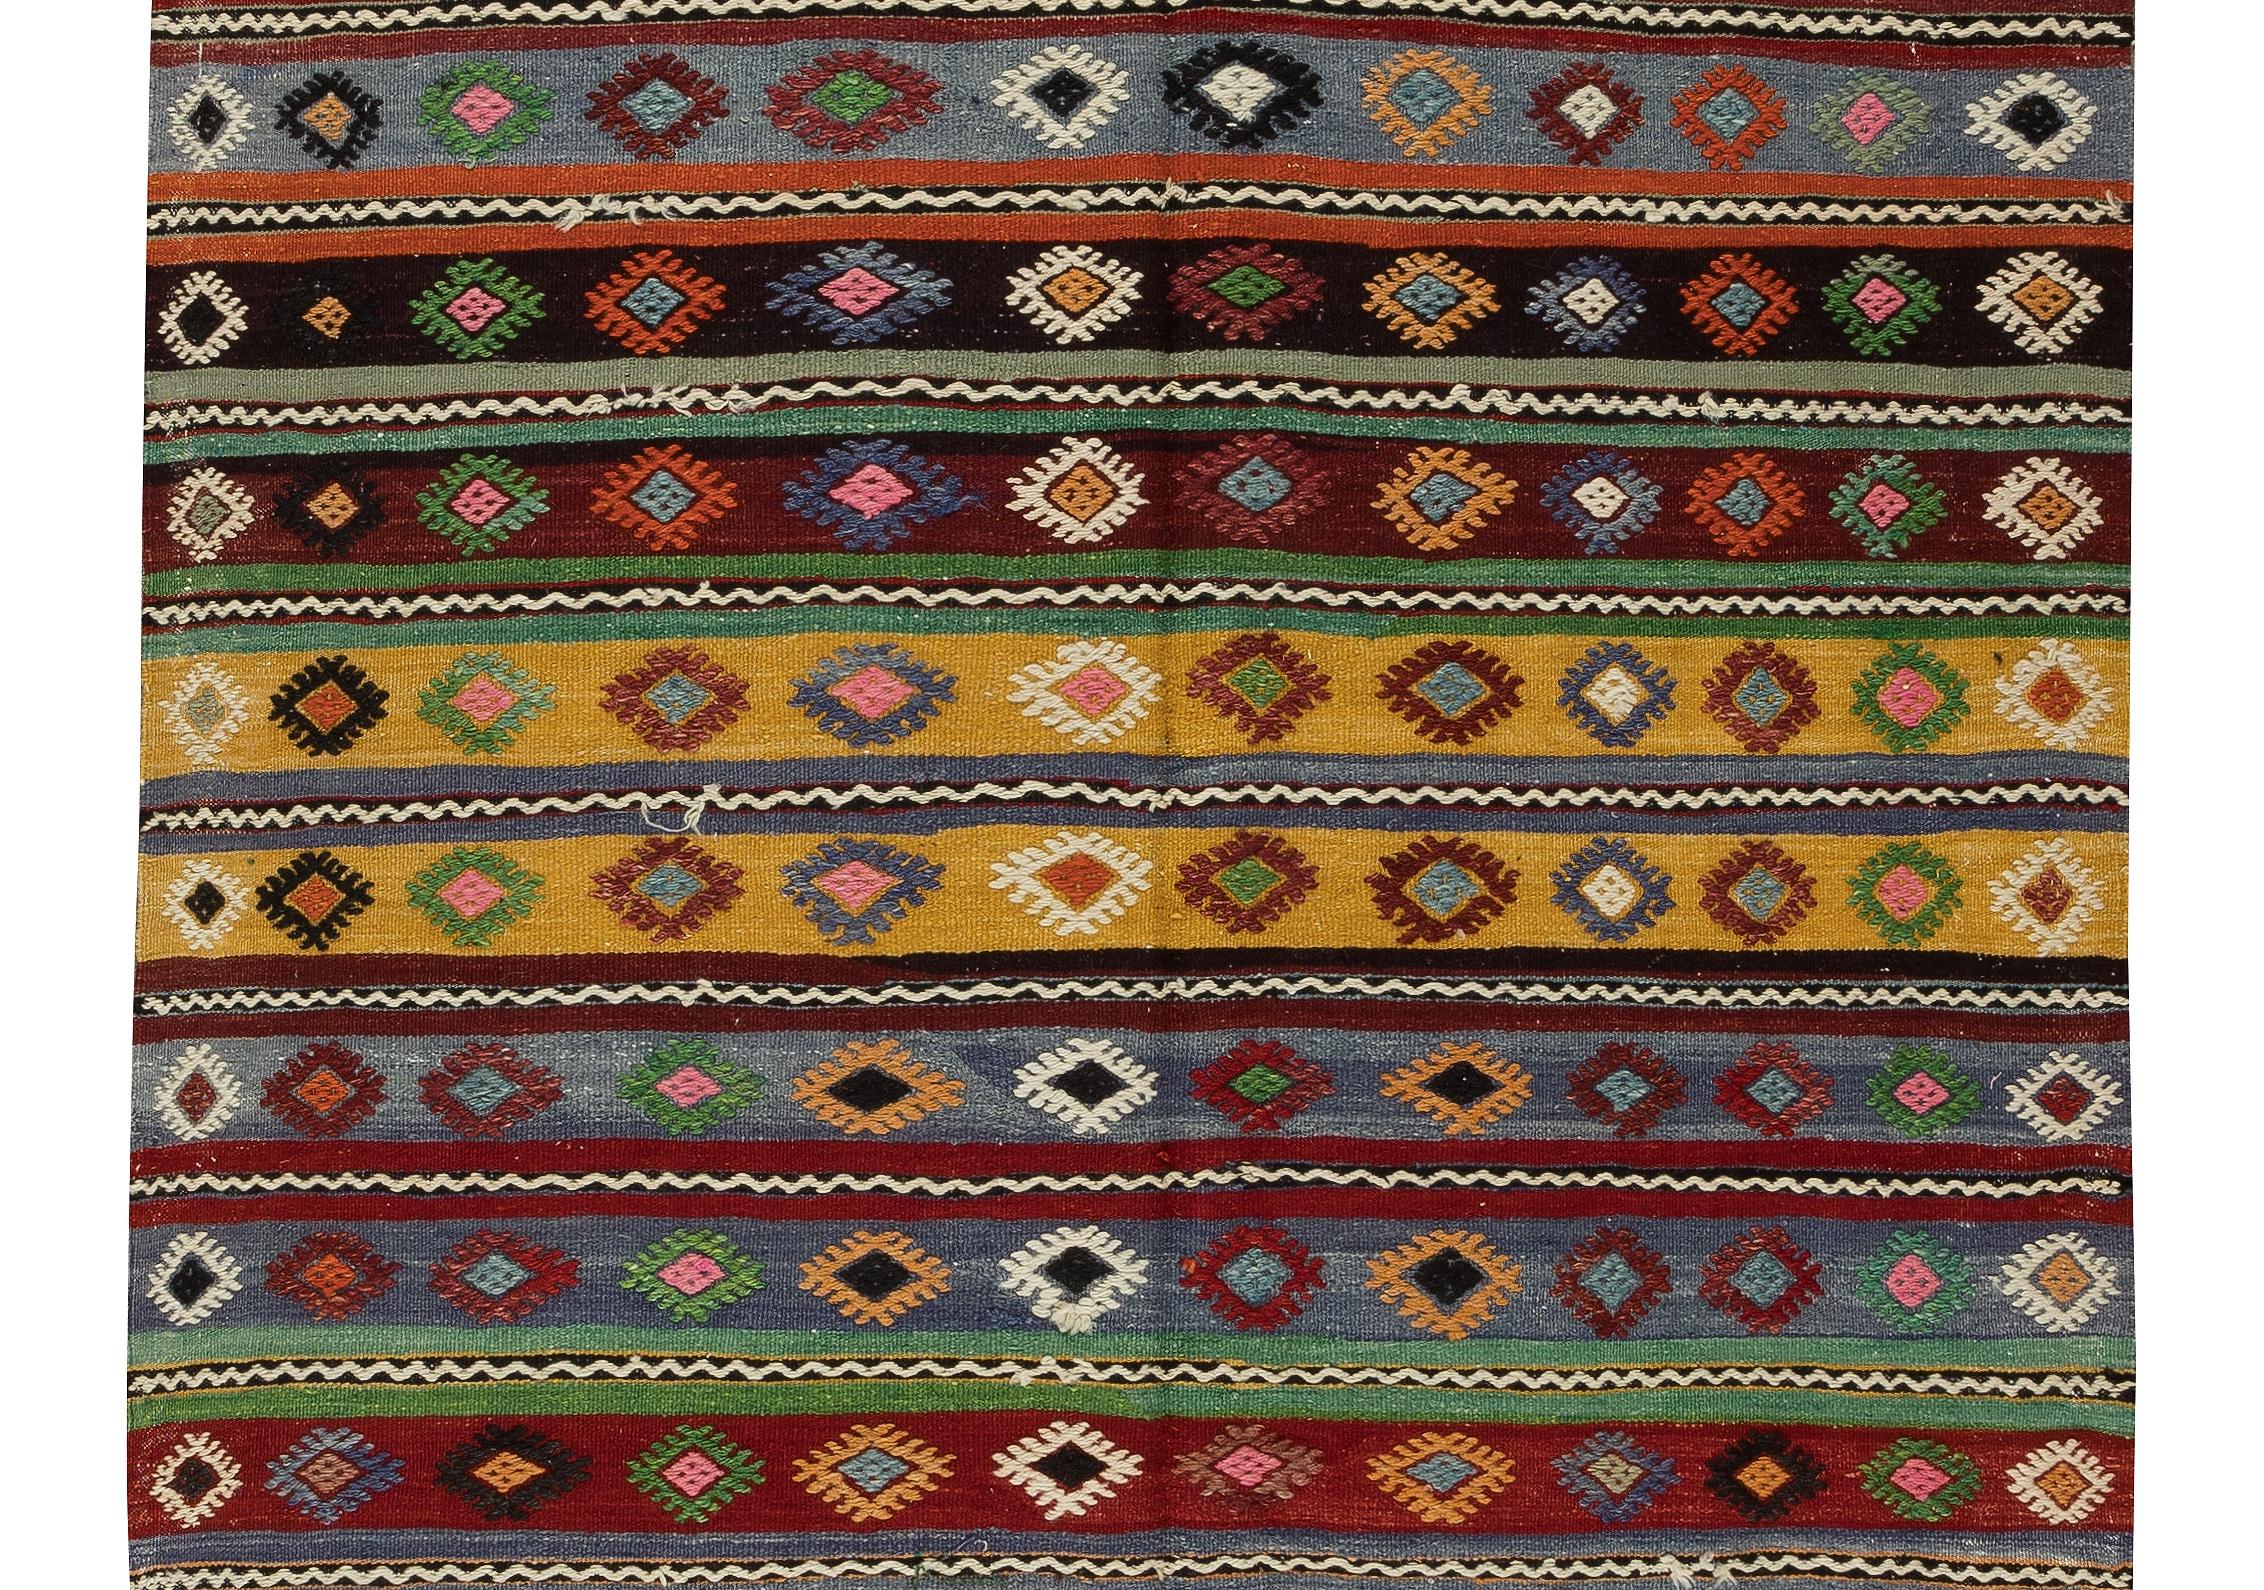 Wool 5x11.2 Ft Vintage Turkish Kilim Runner. Colorful Hand-Woven Rug for Hallway For Sale